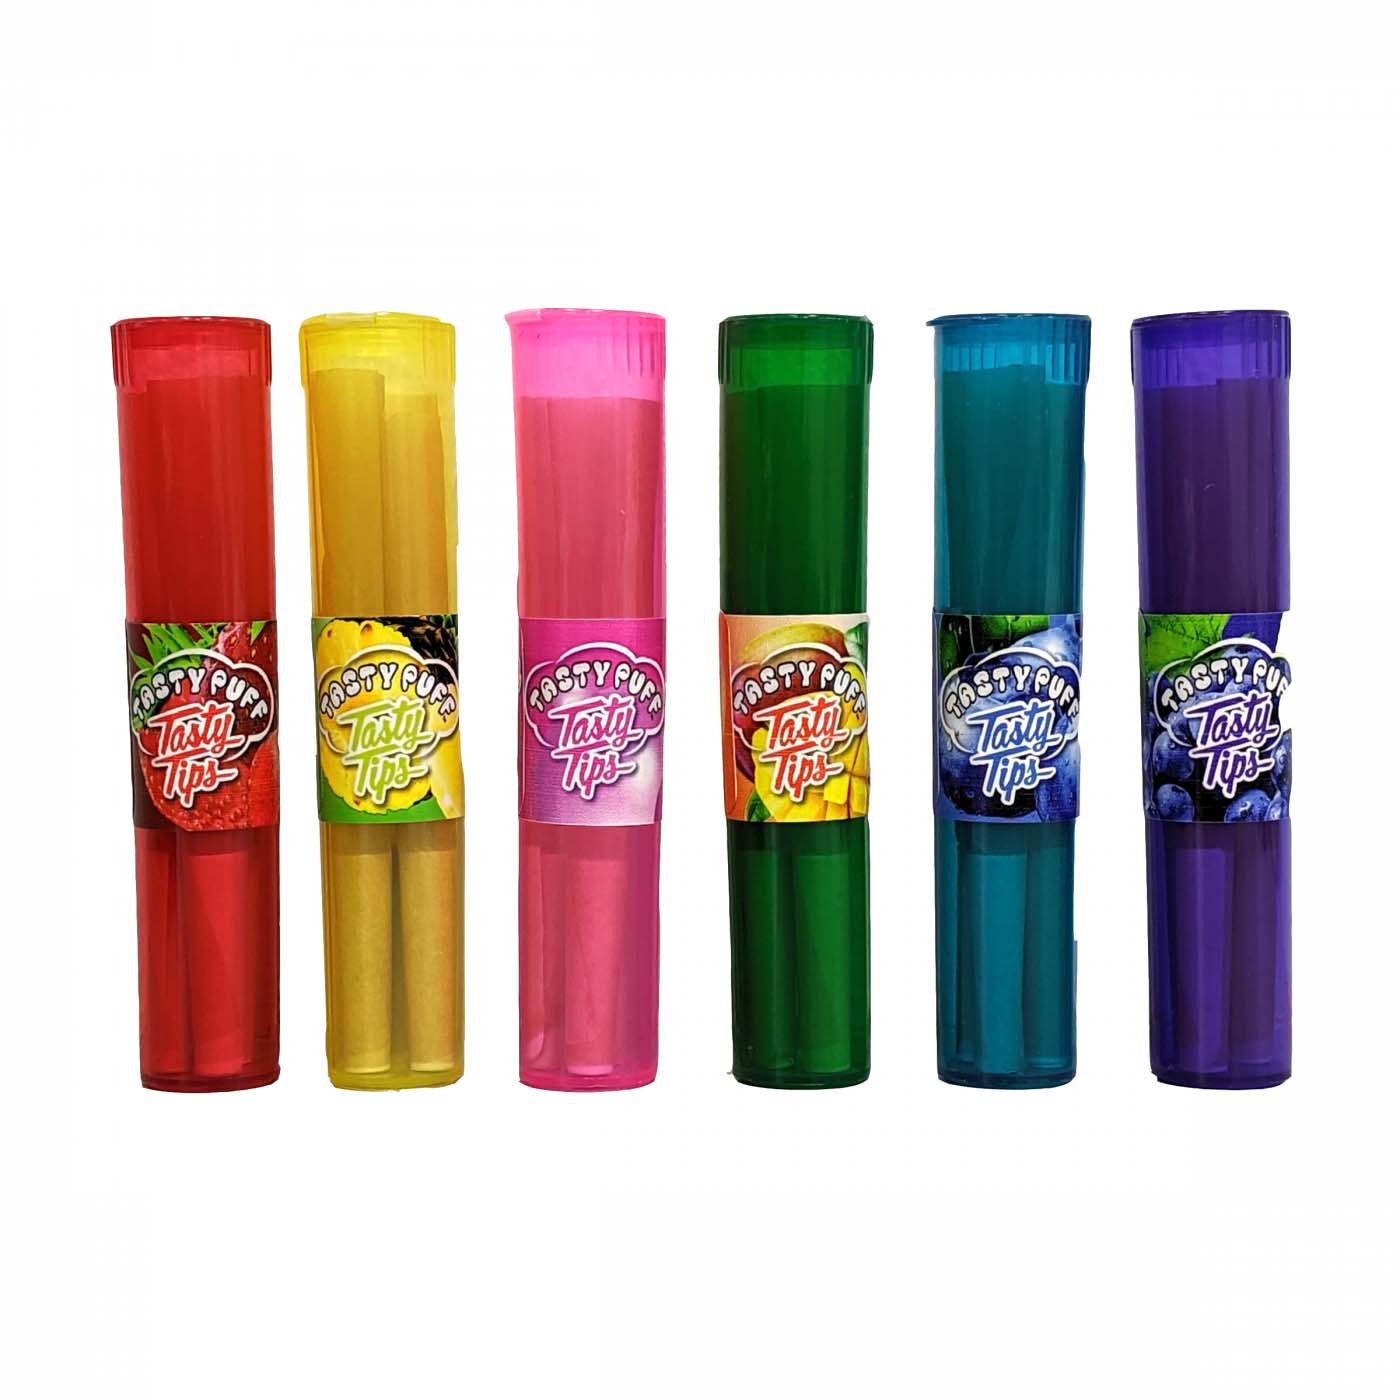 Tasty Palms by Tasty Puff Pre Rolled Palms Sample Pack All 6 Flavors 